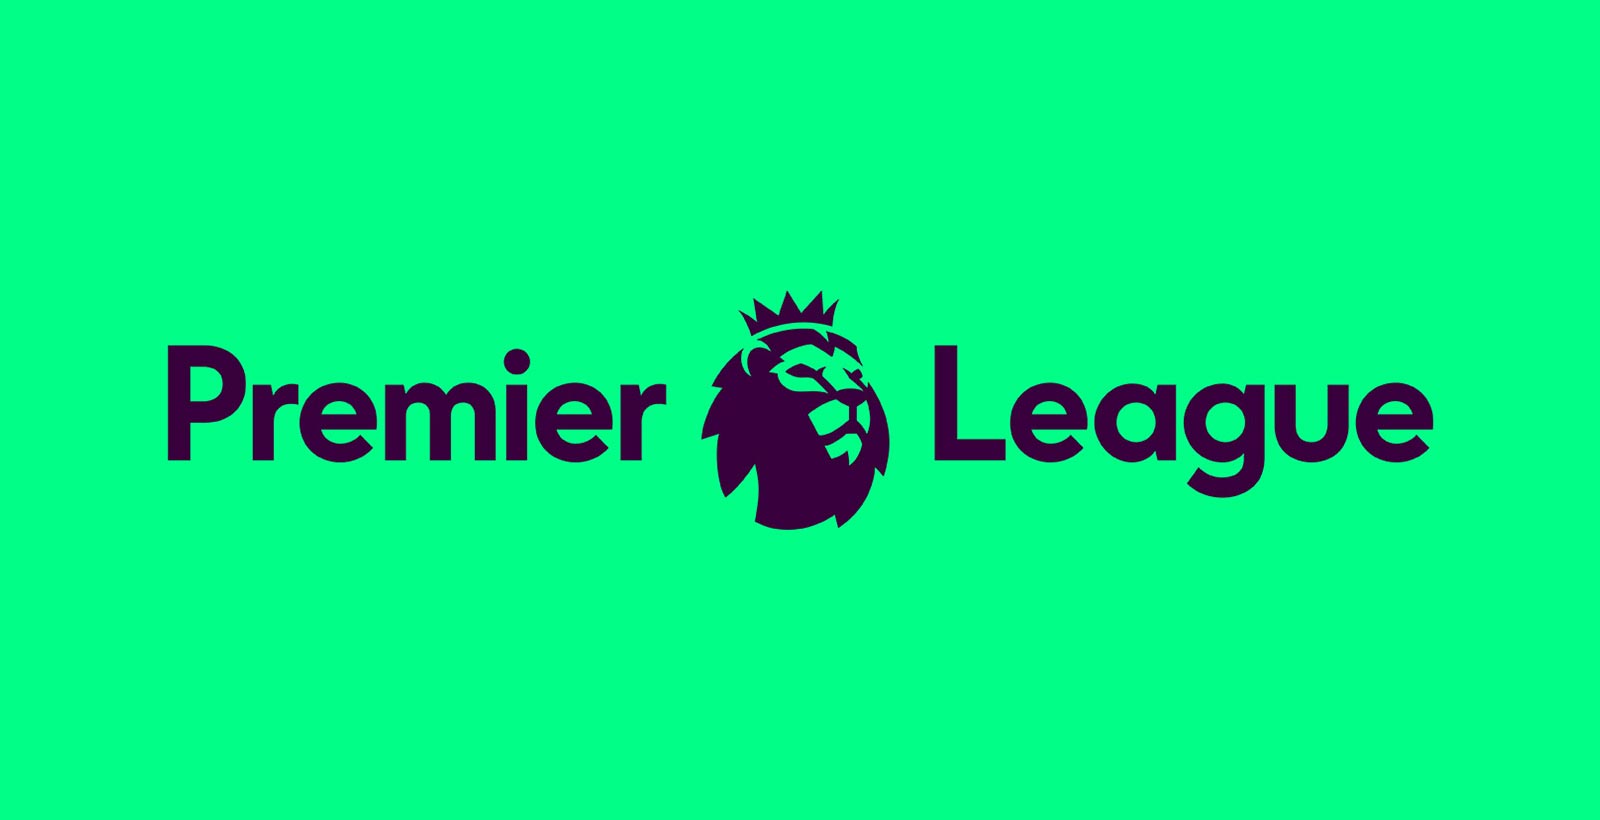 LFC Premier League Fixtures for 2017/18 released: Reds face Watford